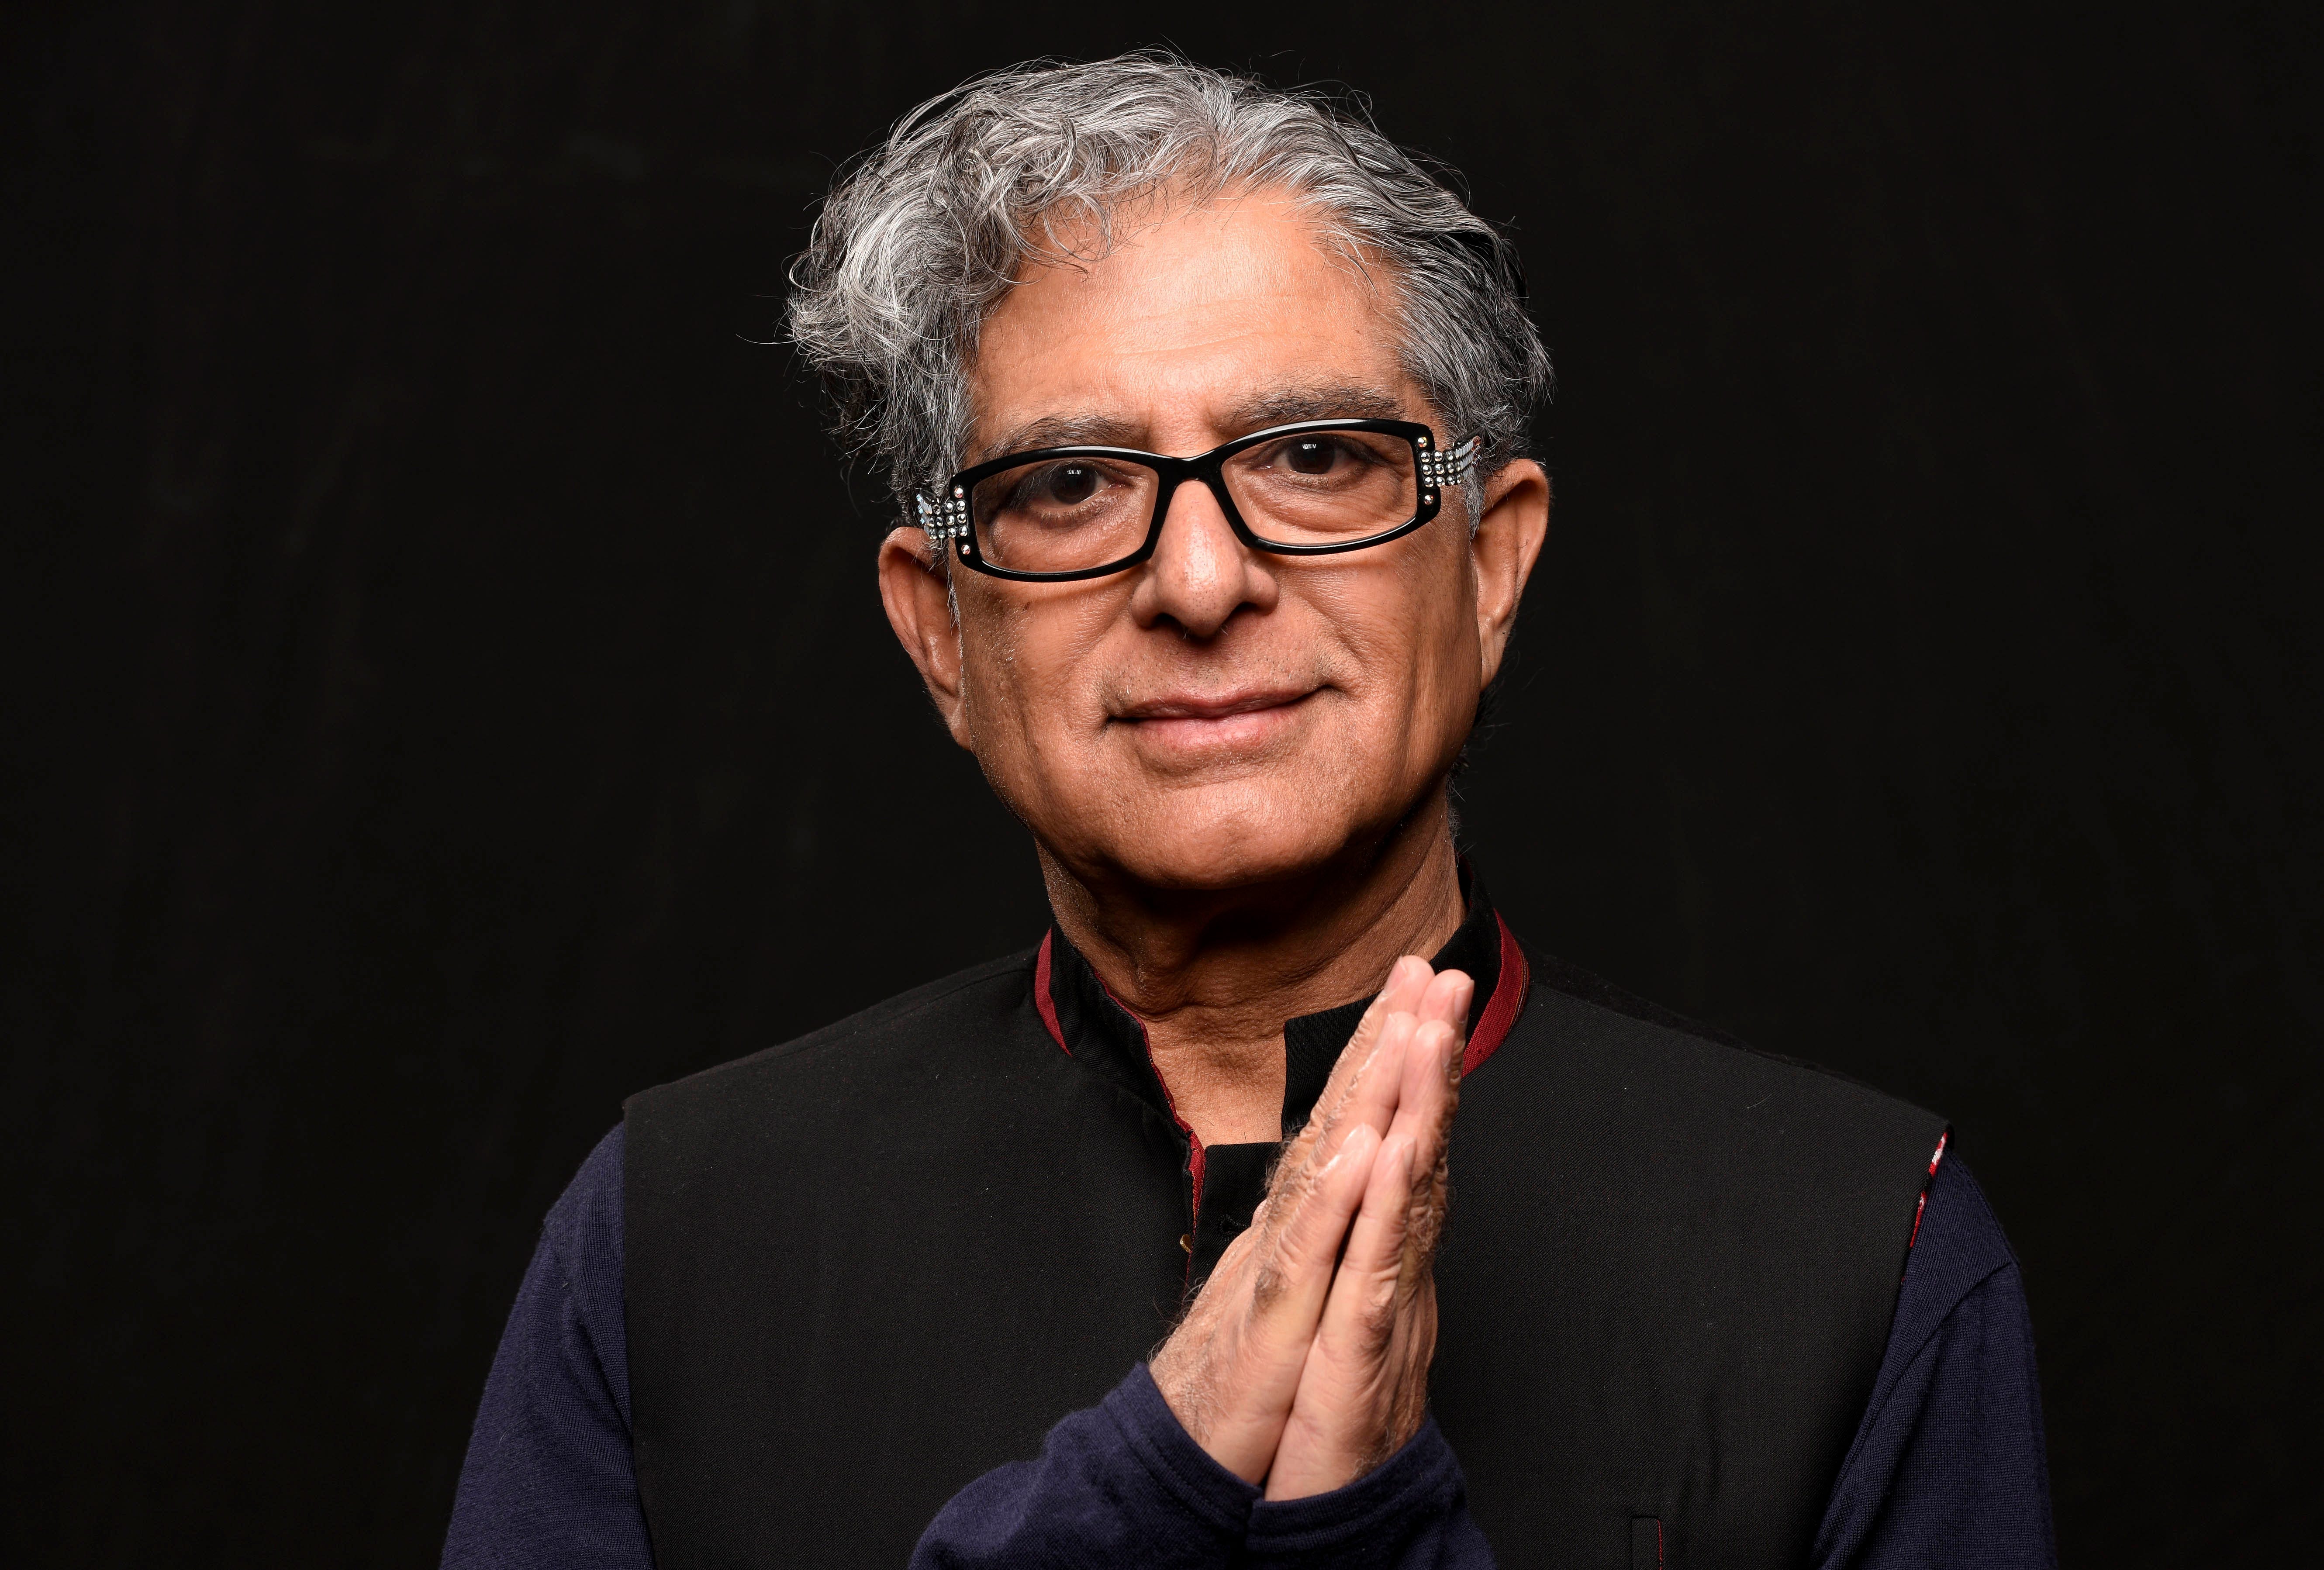 Deepak Chopra is teaming up with Alexa to give 'Daily Reflections